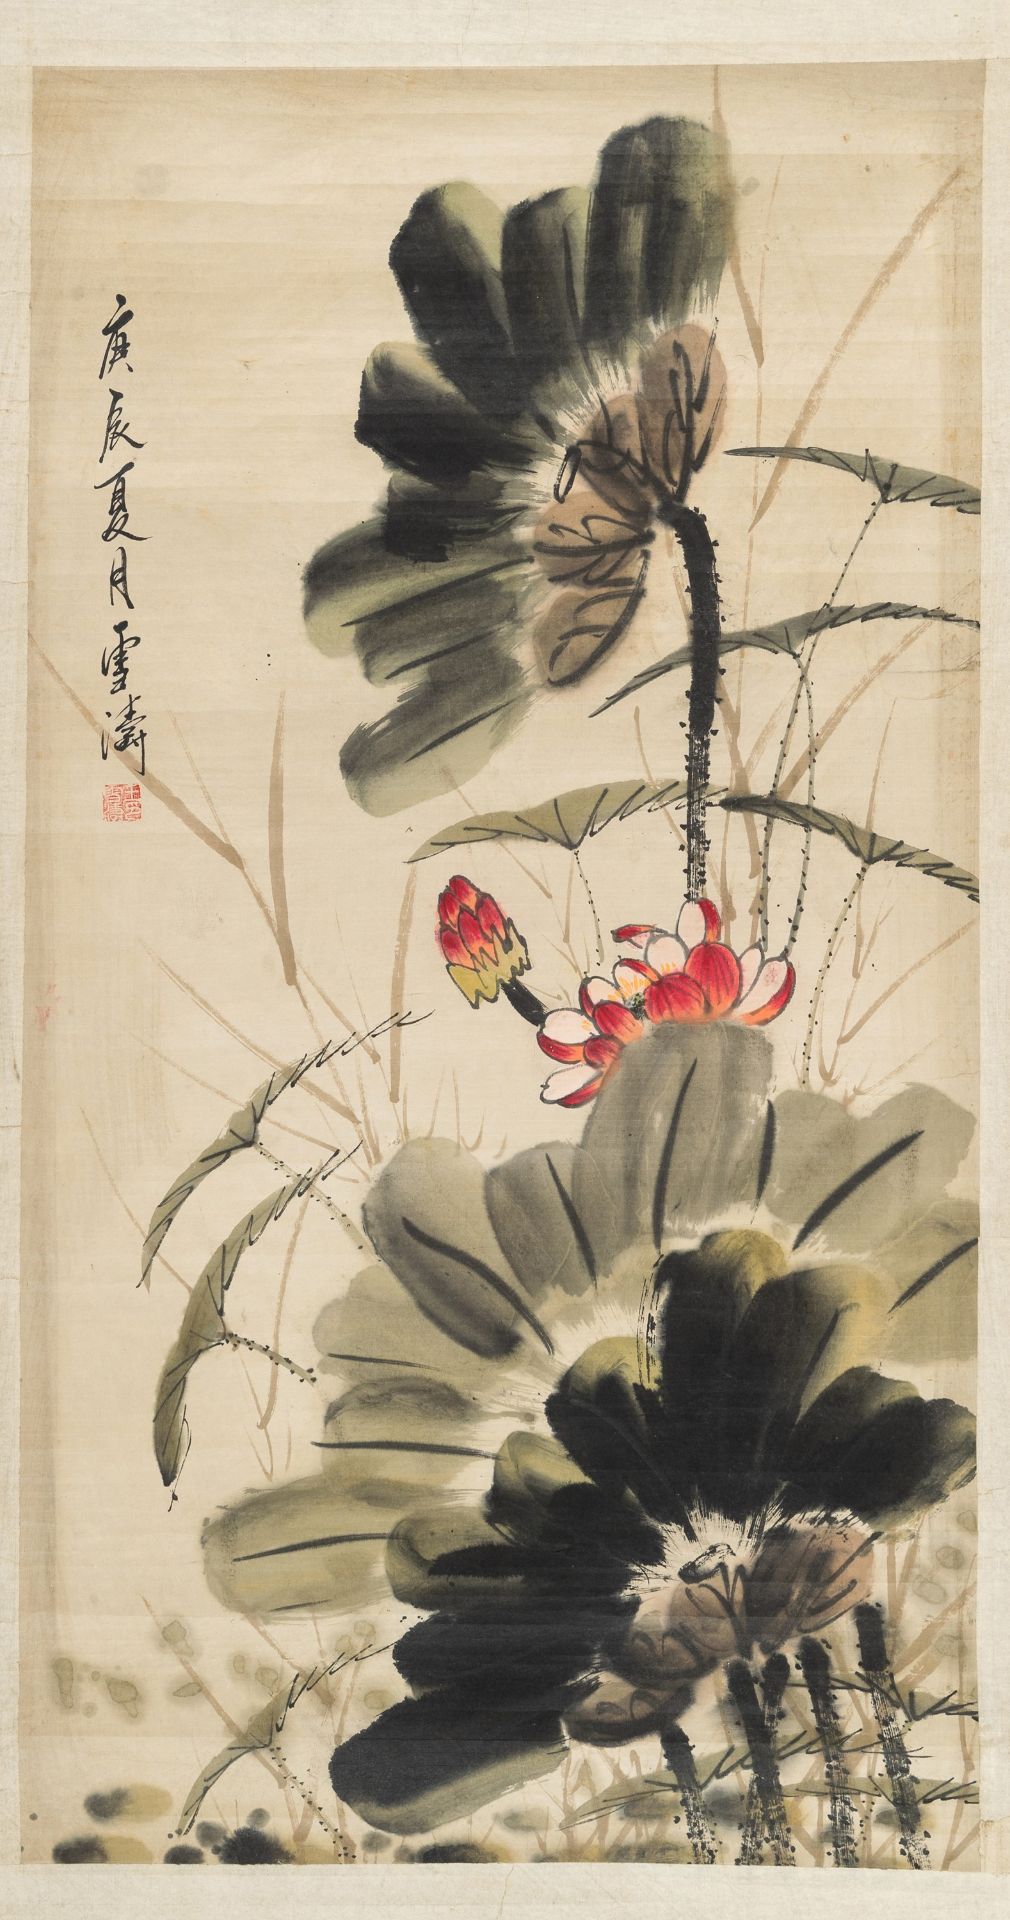 RED LOTUS, ATTRIBUTED TO WANG XUETAO (1903-1982)